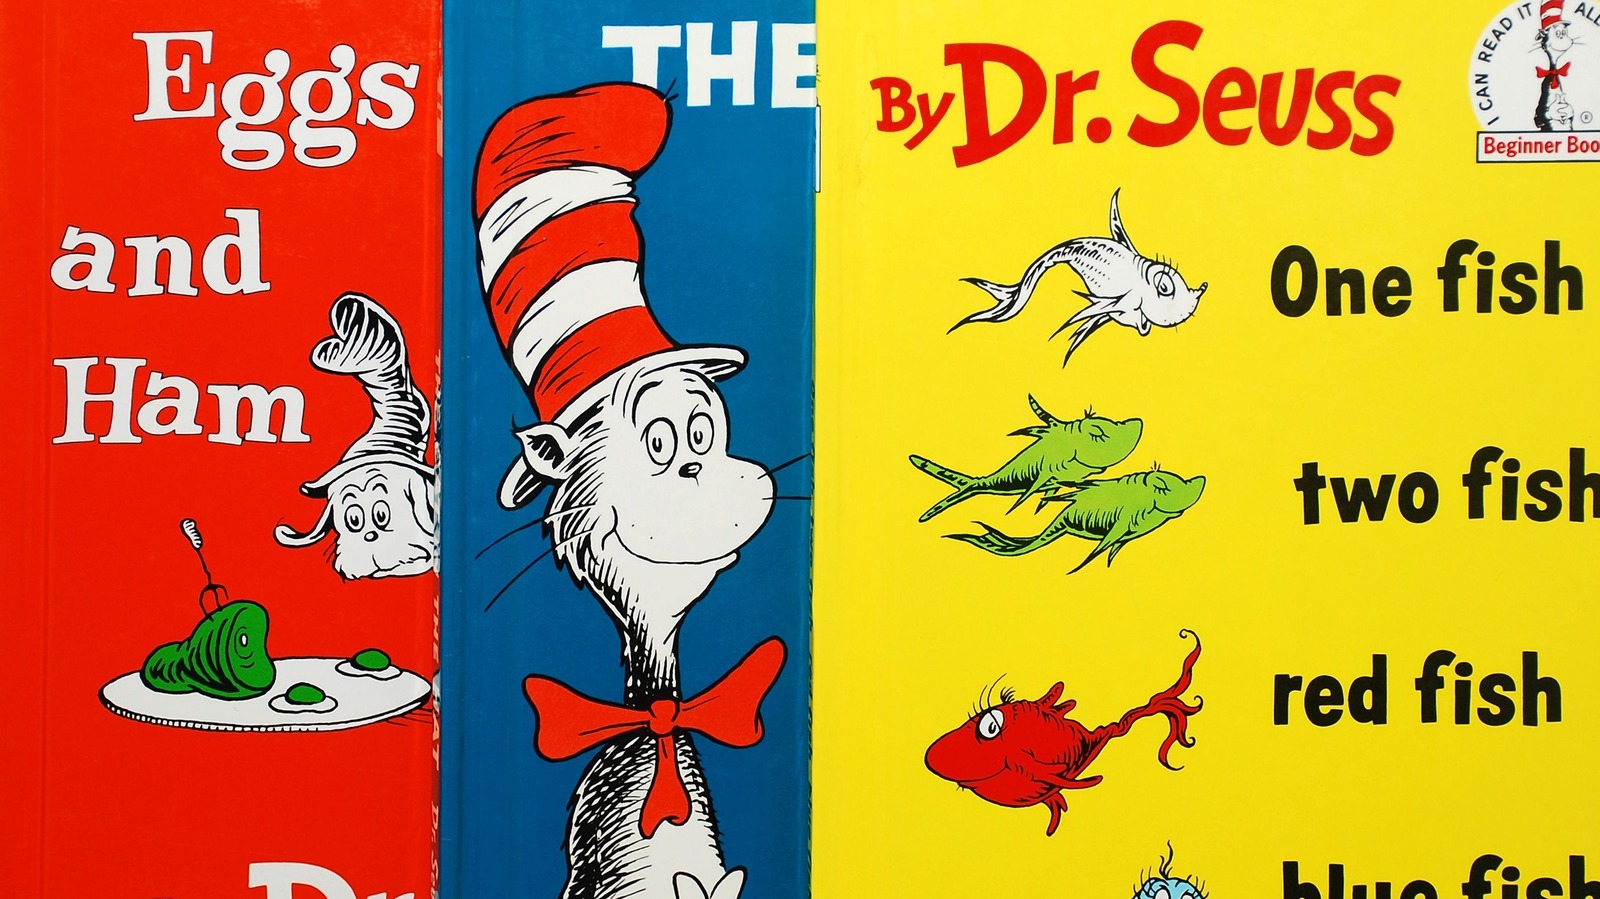 One Of Dr. Seuss' First Books Was Definitely Not Meant For Kids